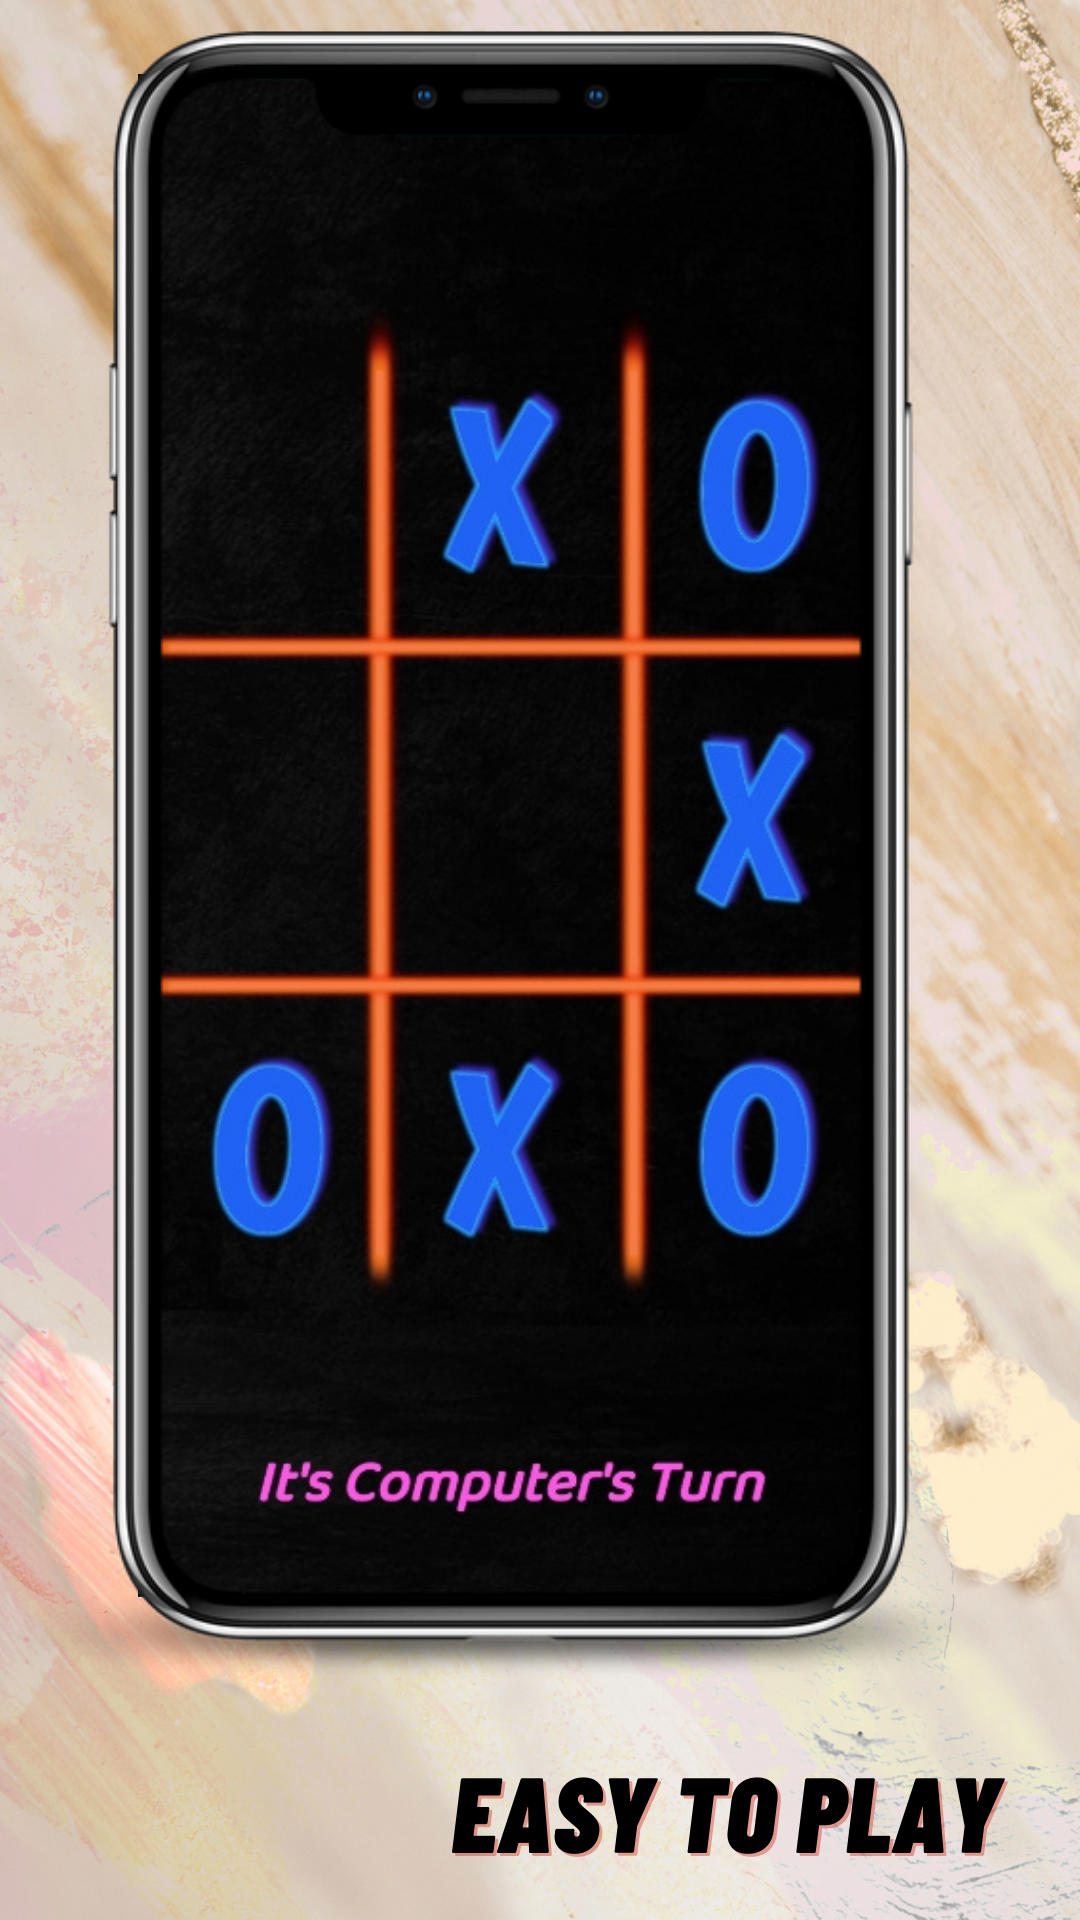 Learn How to Build a Multiplayer Tic Tac Toe (1)